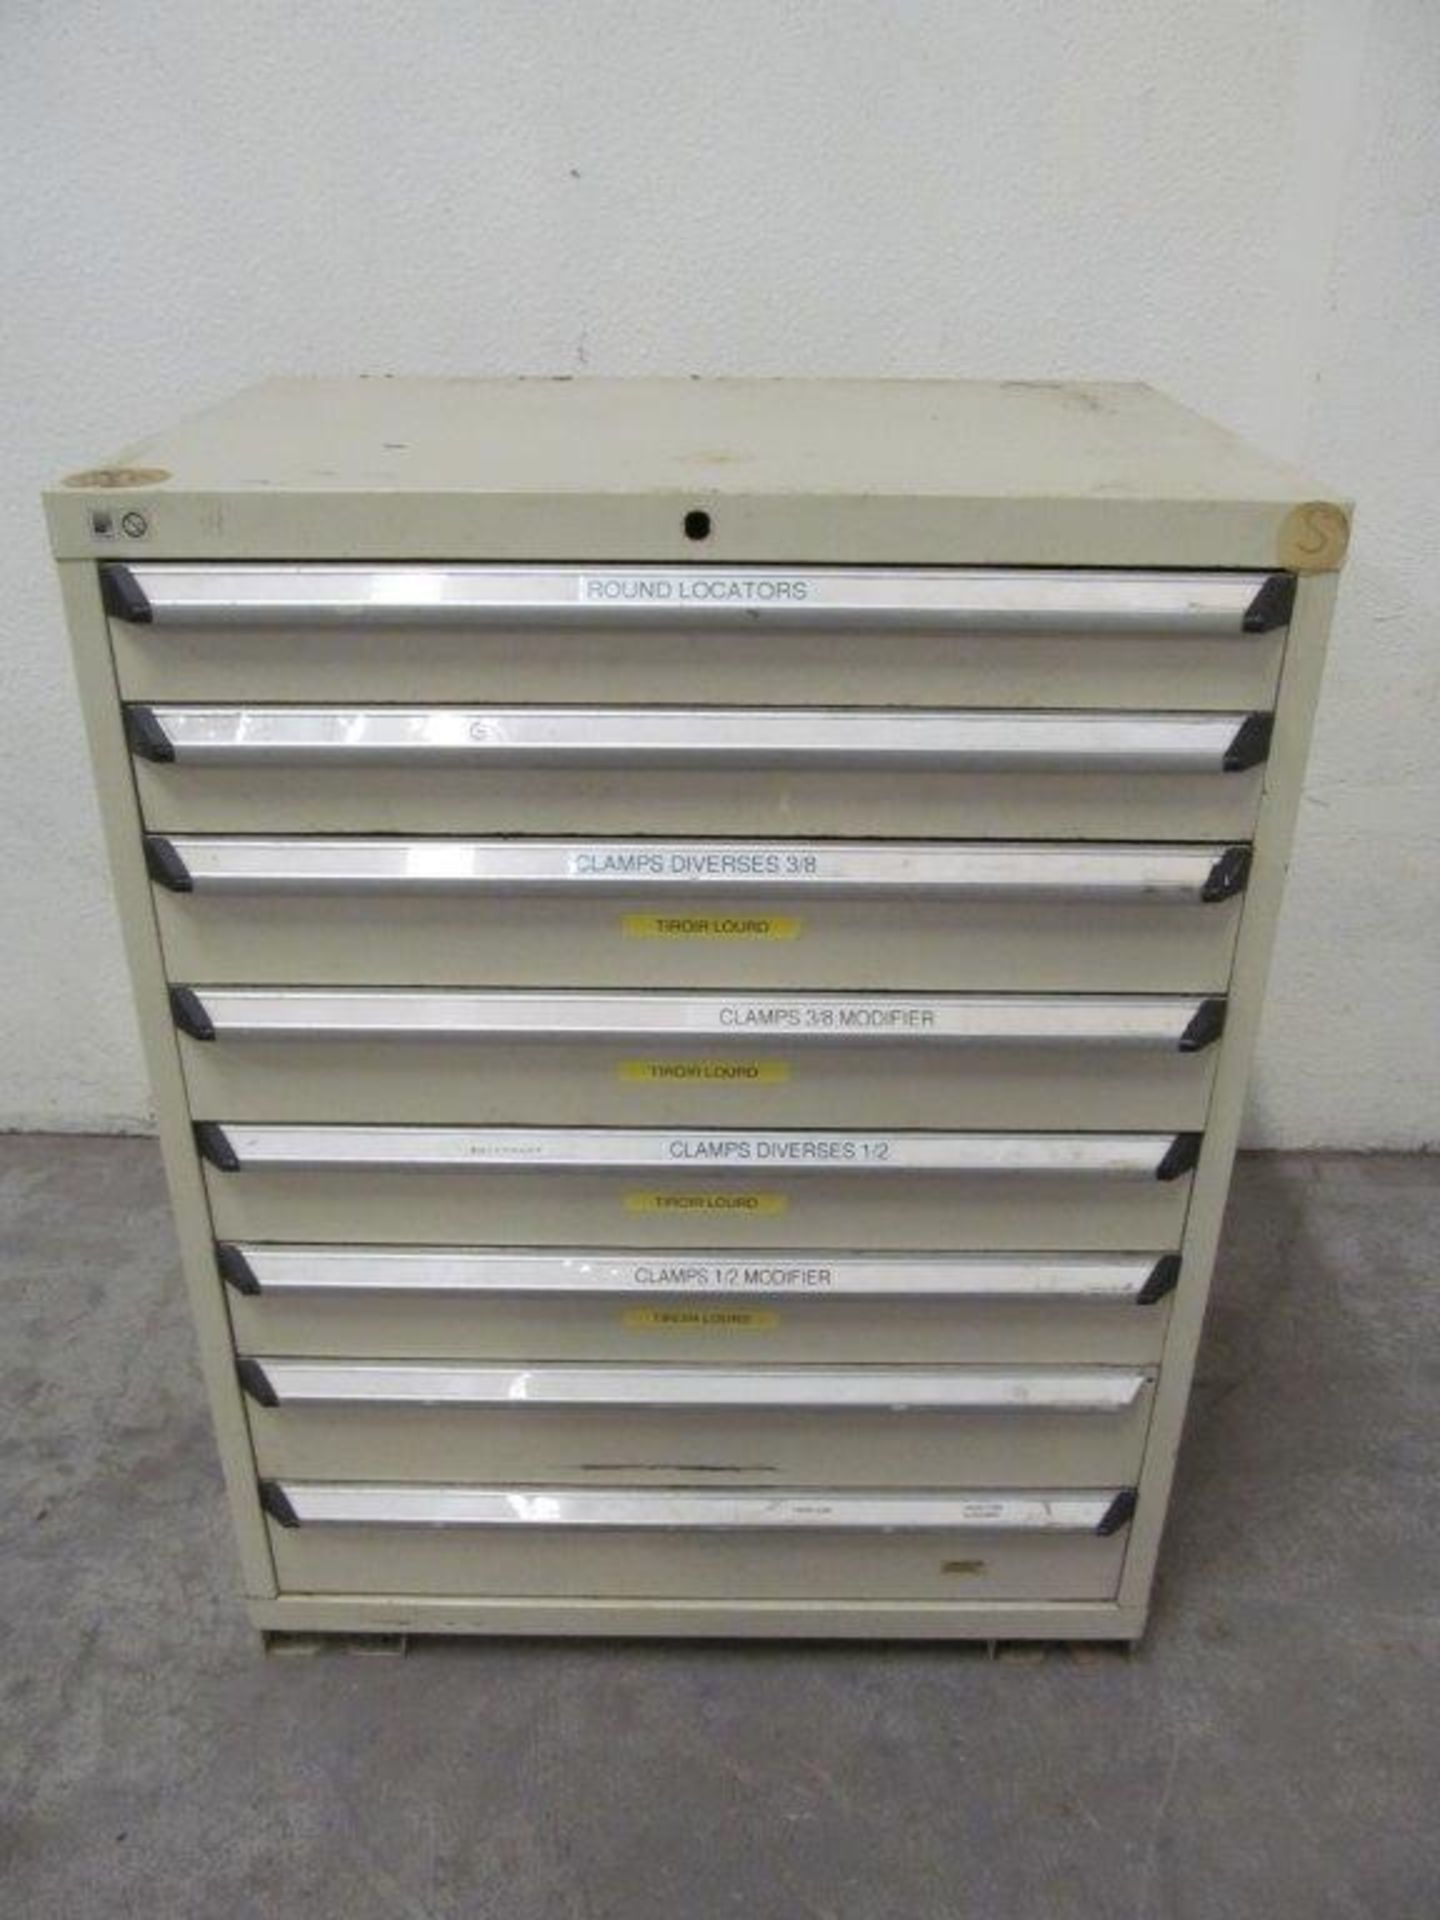 8 DRAWER TOOL CABINET, 24'' X 35'' X 48'' HIGH - LOCATION - HAWKESBURY, ONTARIO - Image 2 of 2